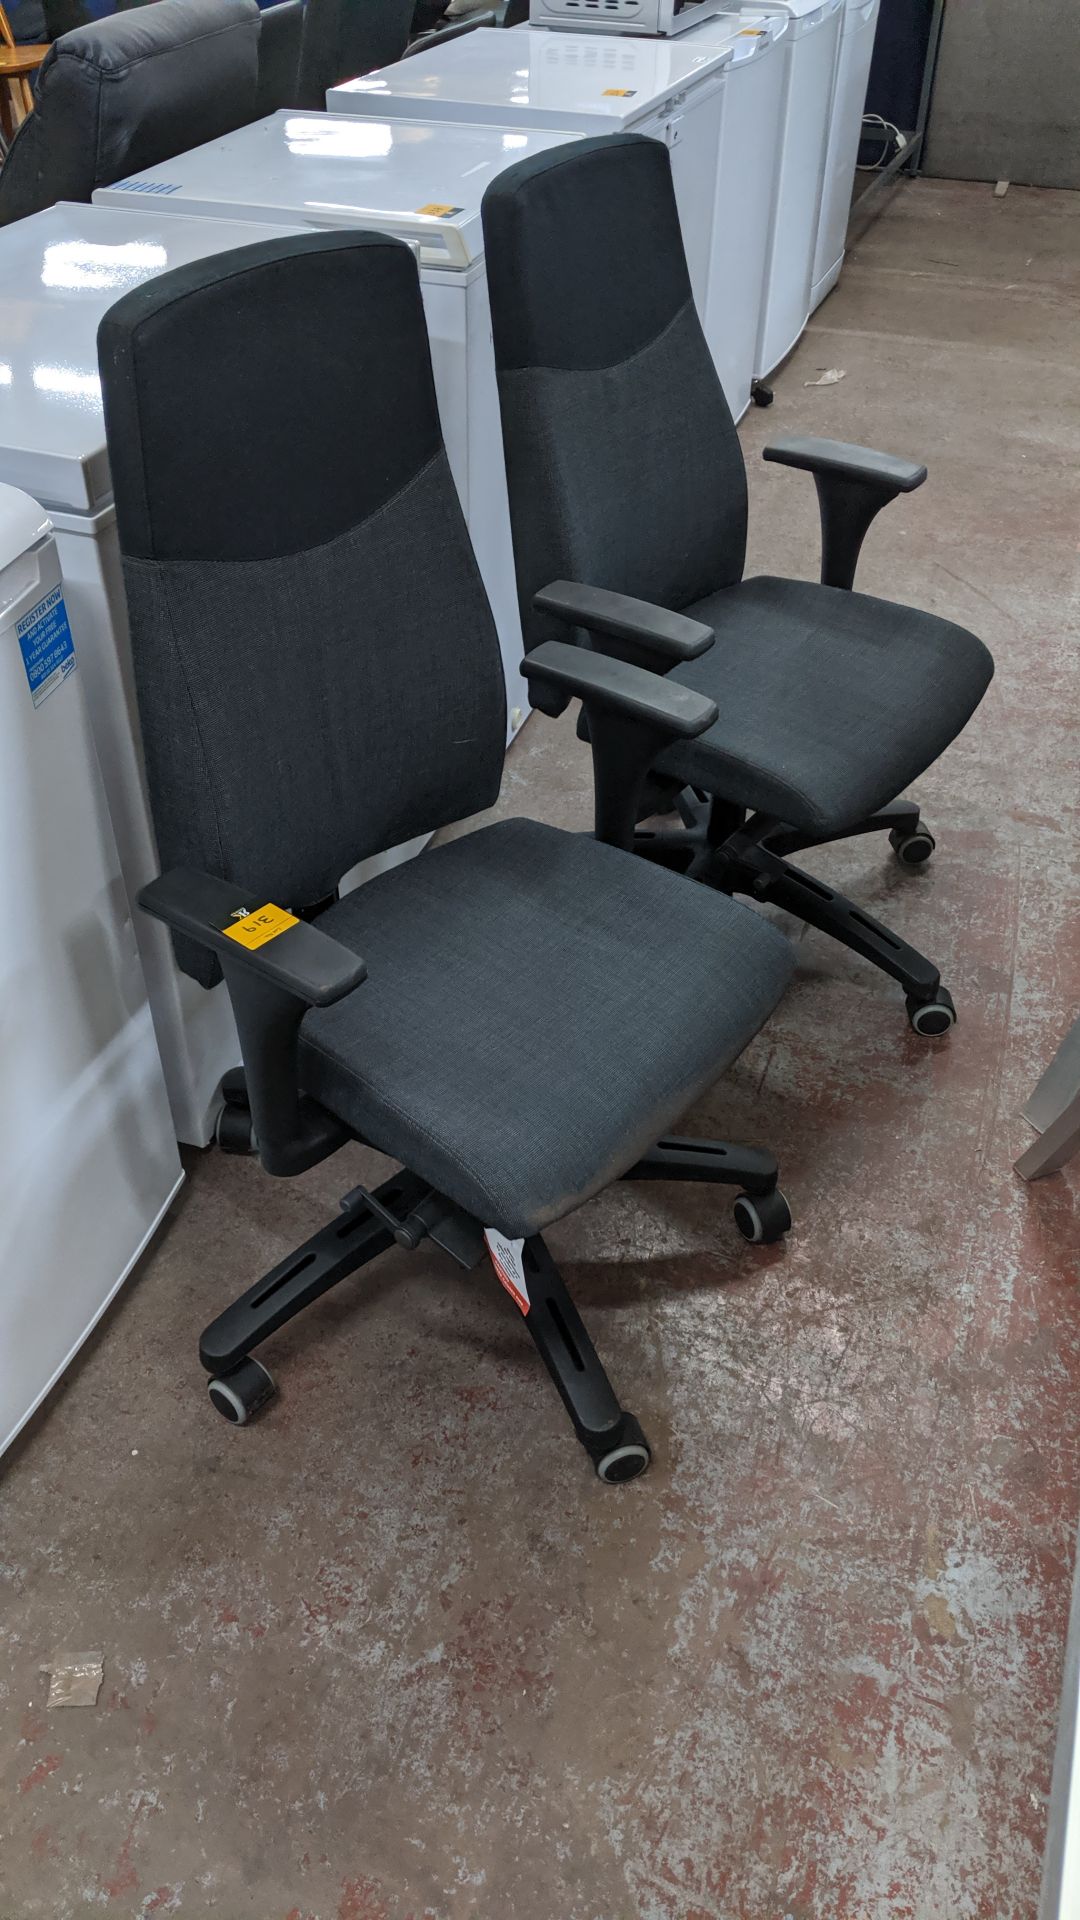 Pair of modern grey & black executive chairs with arms NB Lots 317 - 319 each consist of a pair of